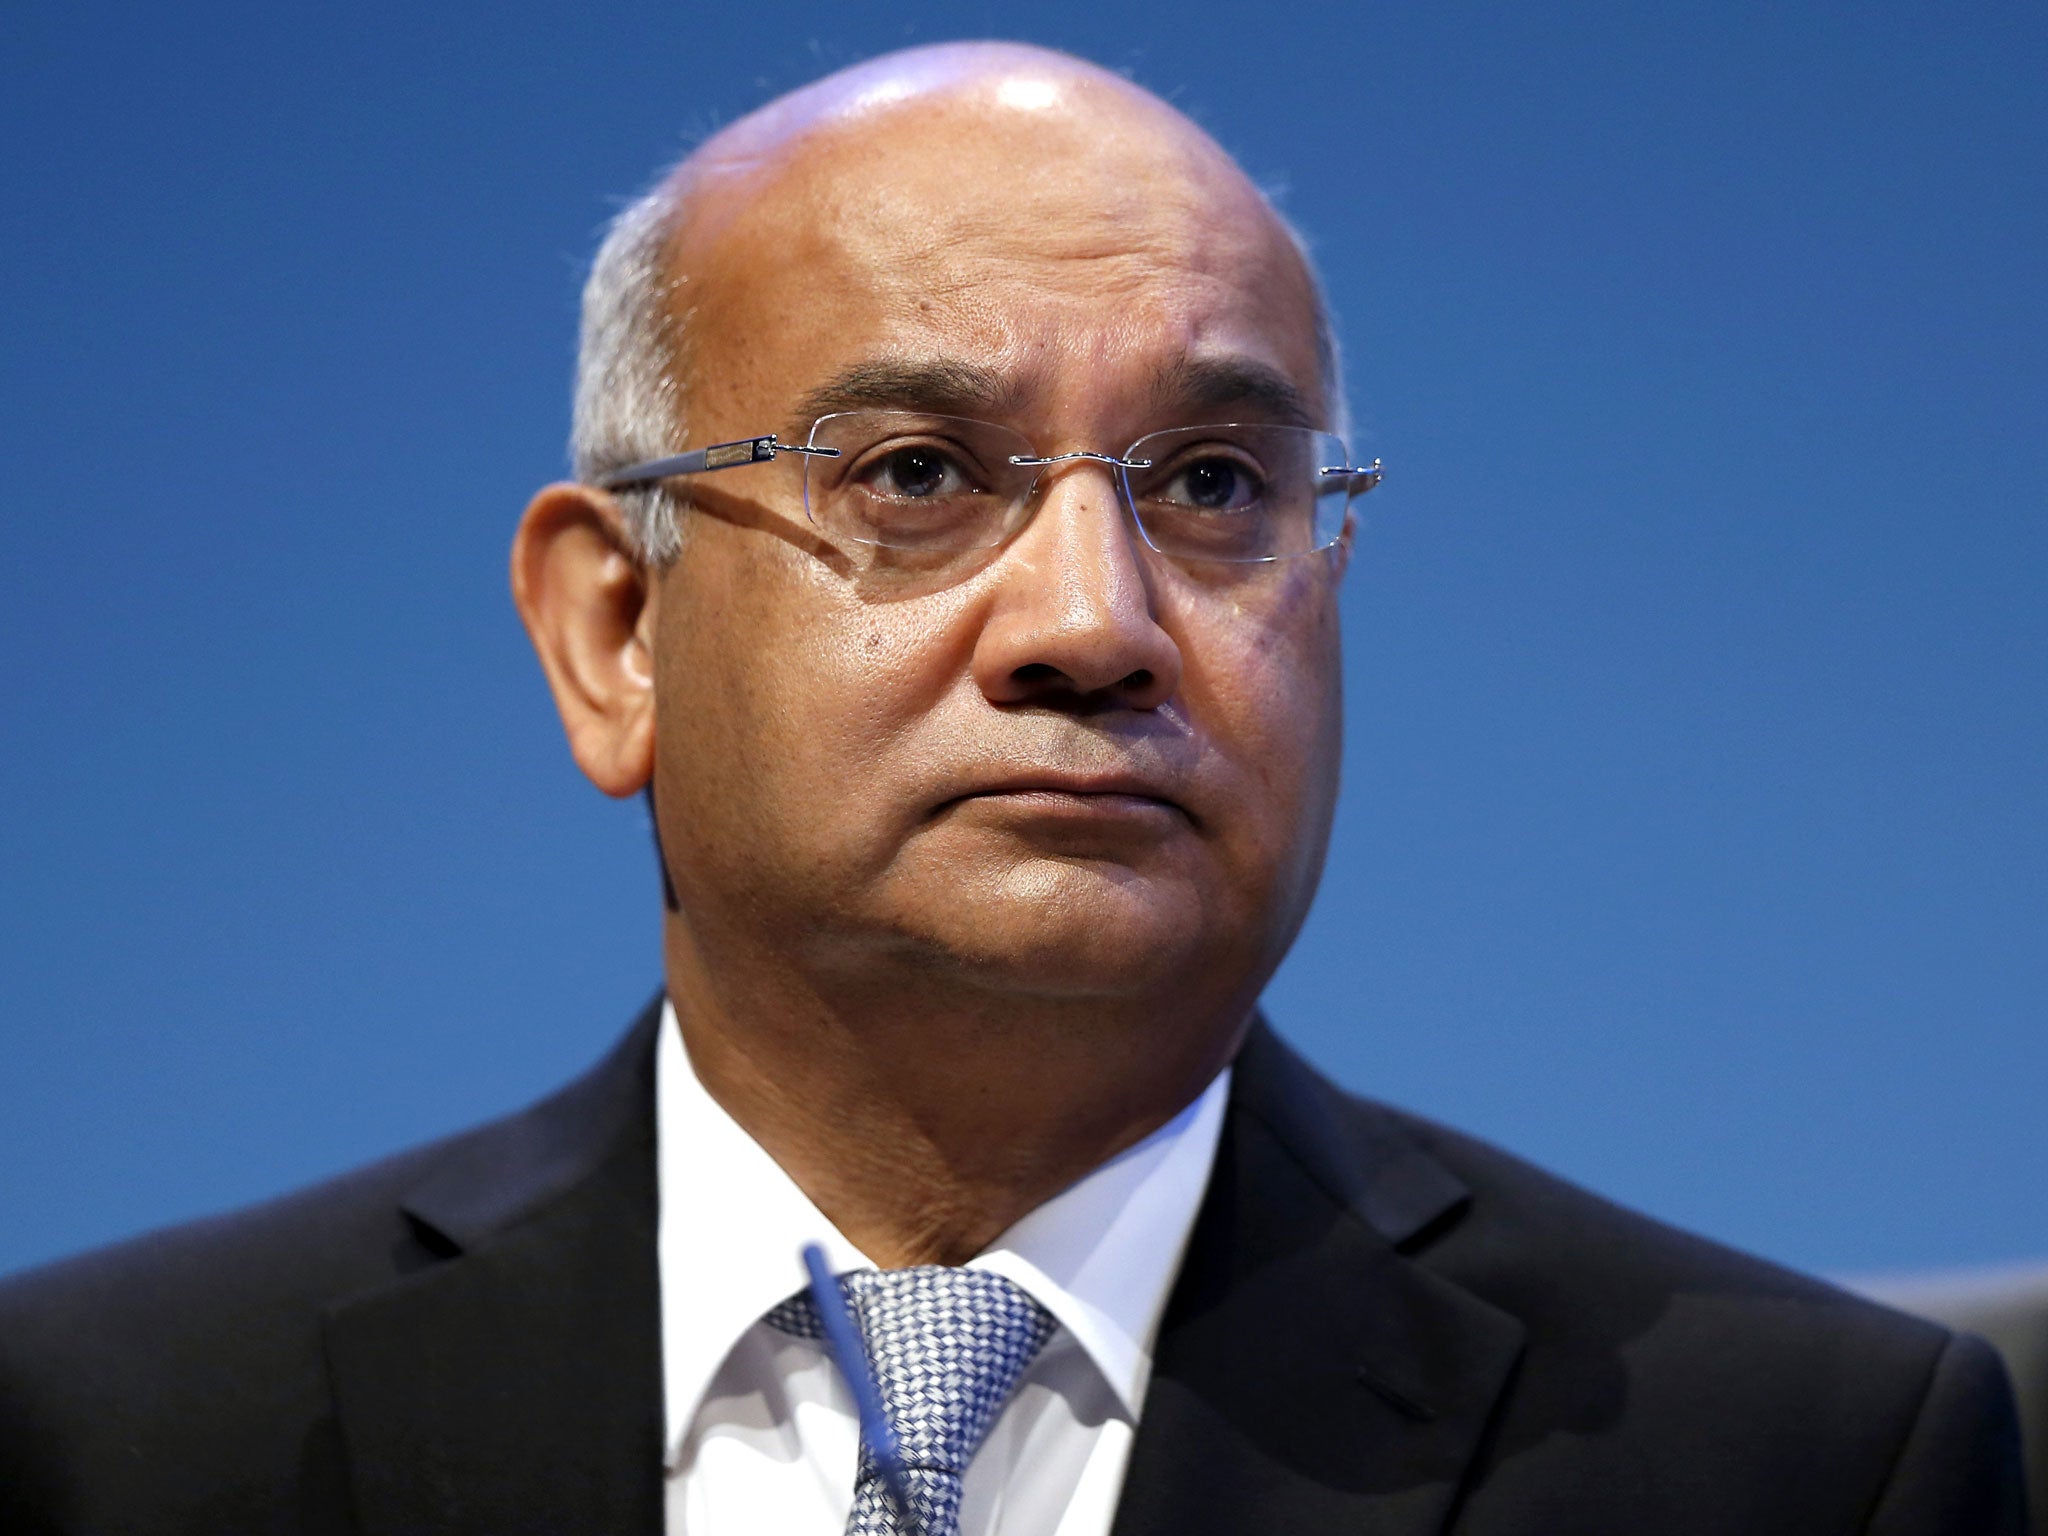 Keith Vaz said the vote was a 'catastrophe'